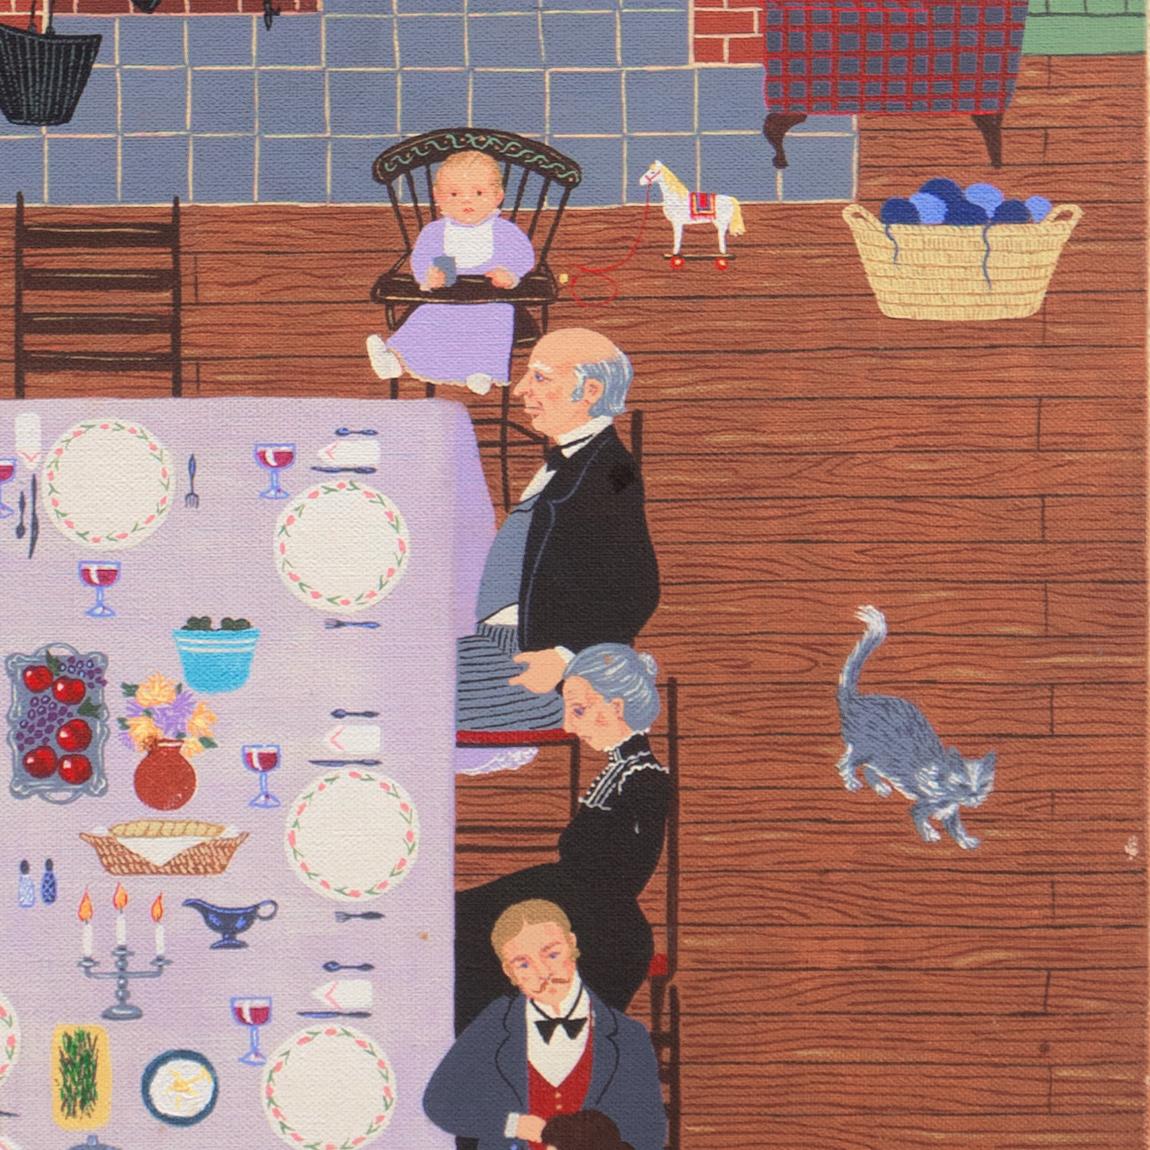 Signed lower right, 'Pauer' for Jacalyn Pauer (American, 20th century) and dated 1991. Additionally signed, verso, and titled, 'The Family Dinner'.

A substantial, American oil painting showing a family gathered around a well-appointed dinner table